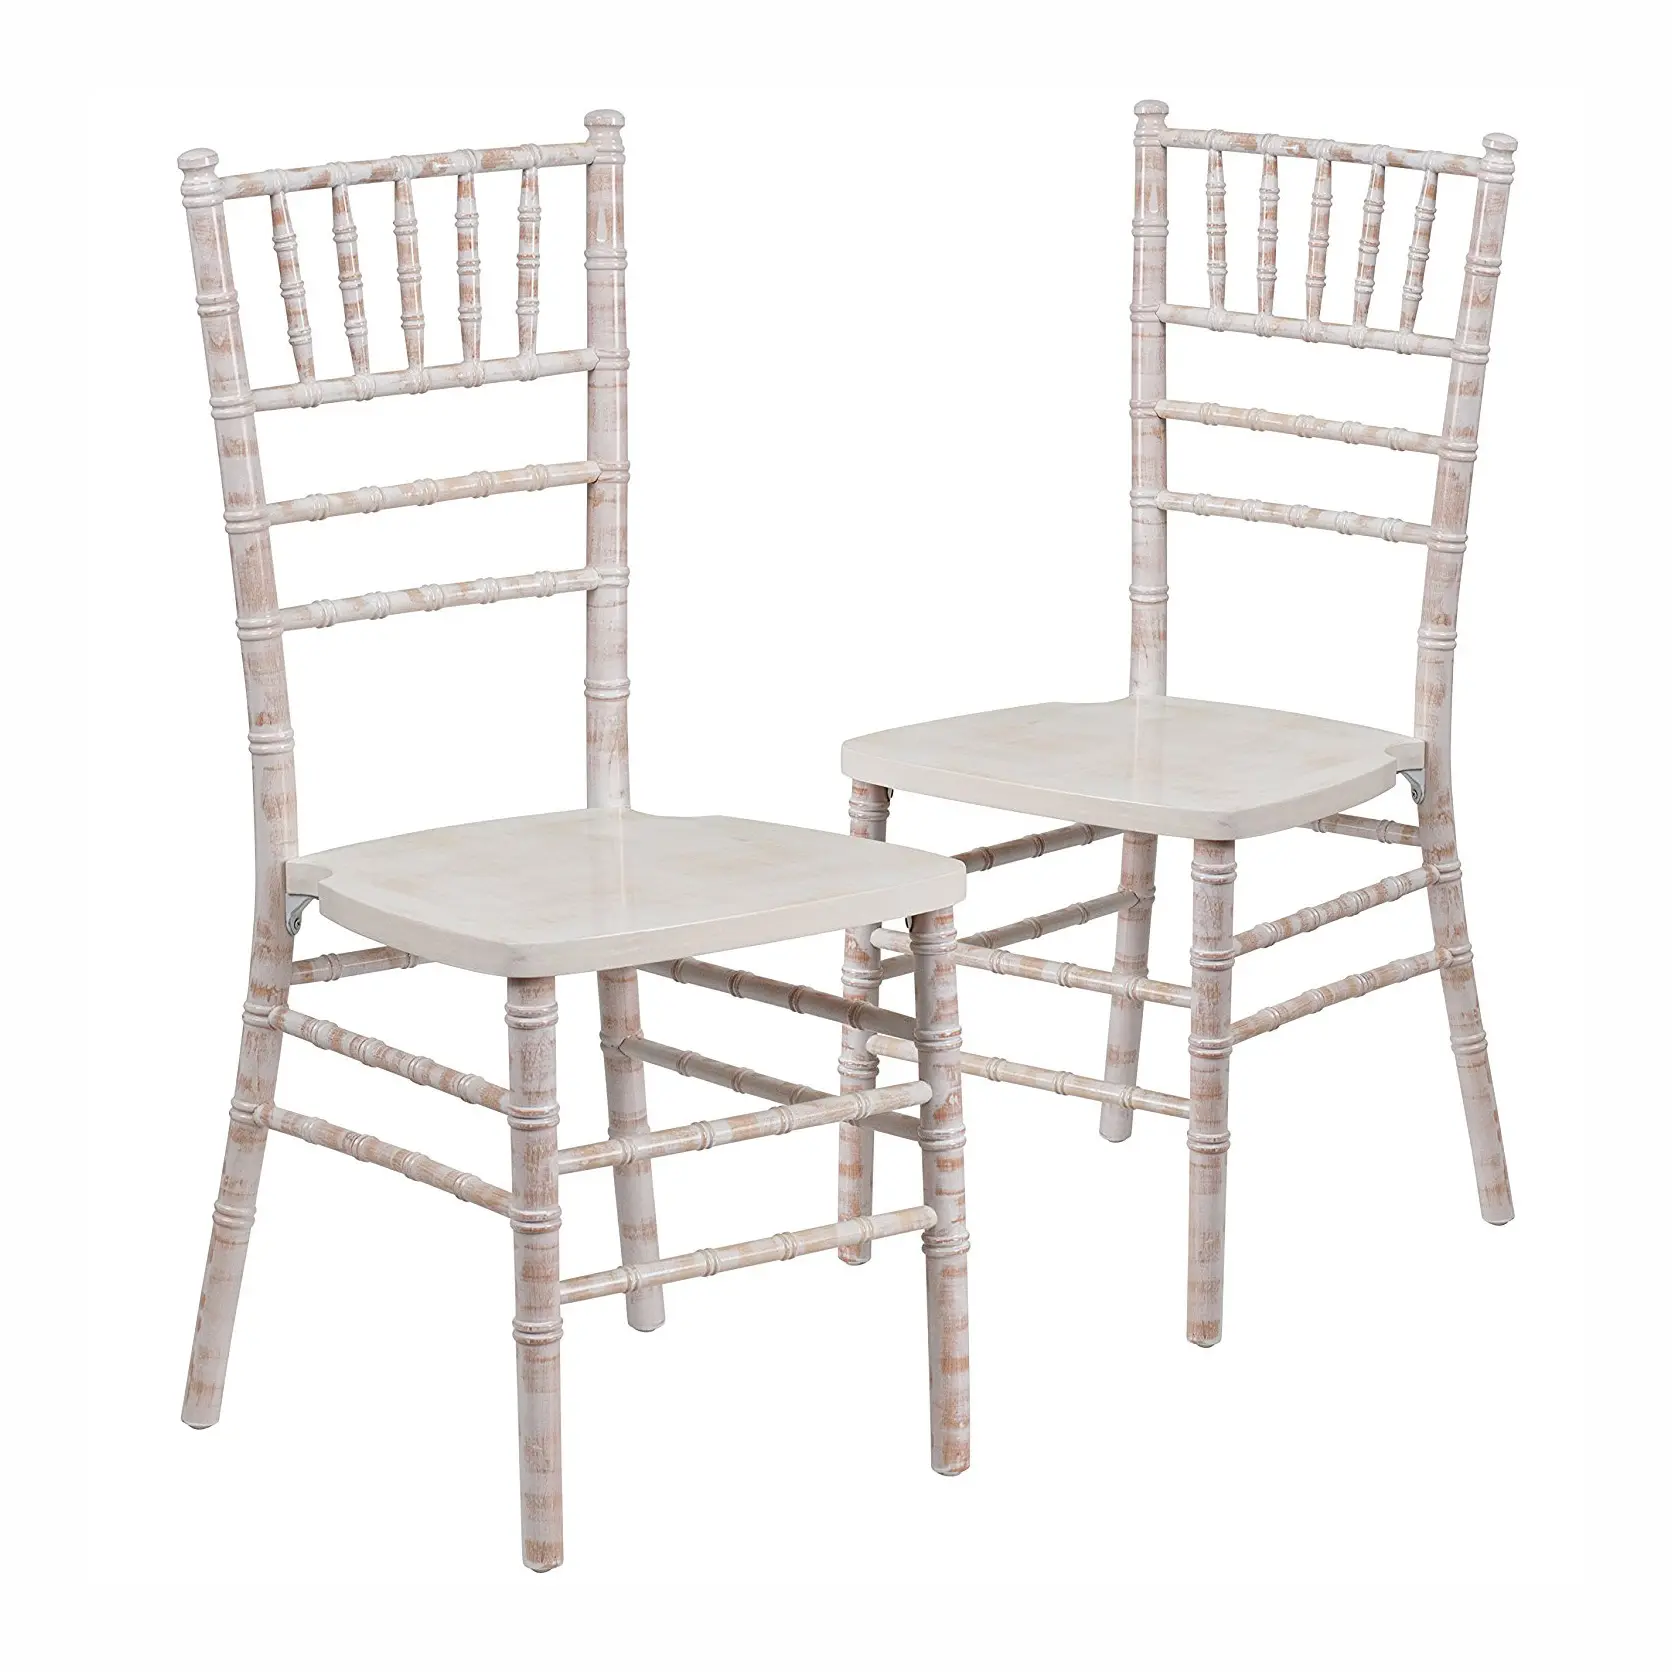 Quality Hotel Furniture Stack Wood Chiavari Chairs Sillas Tiffany Chairs for Wedding